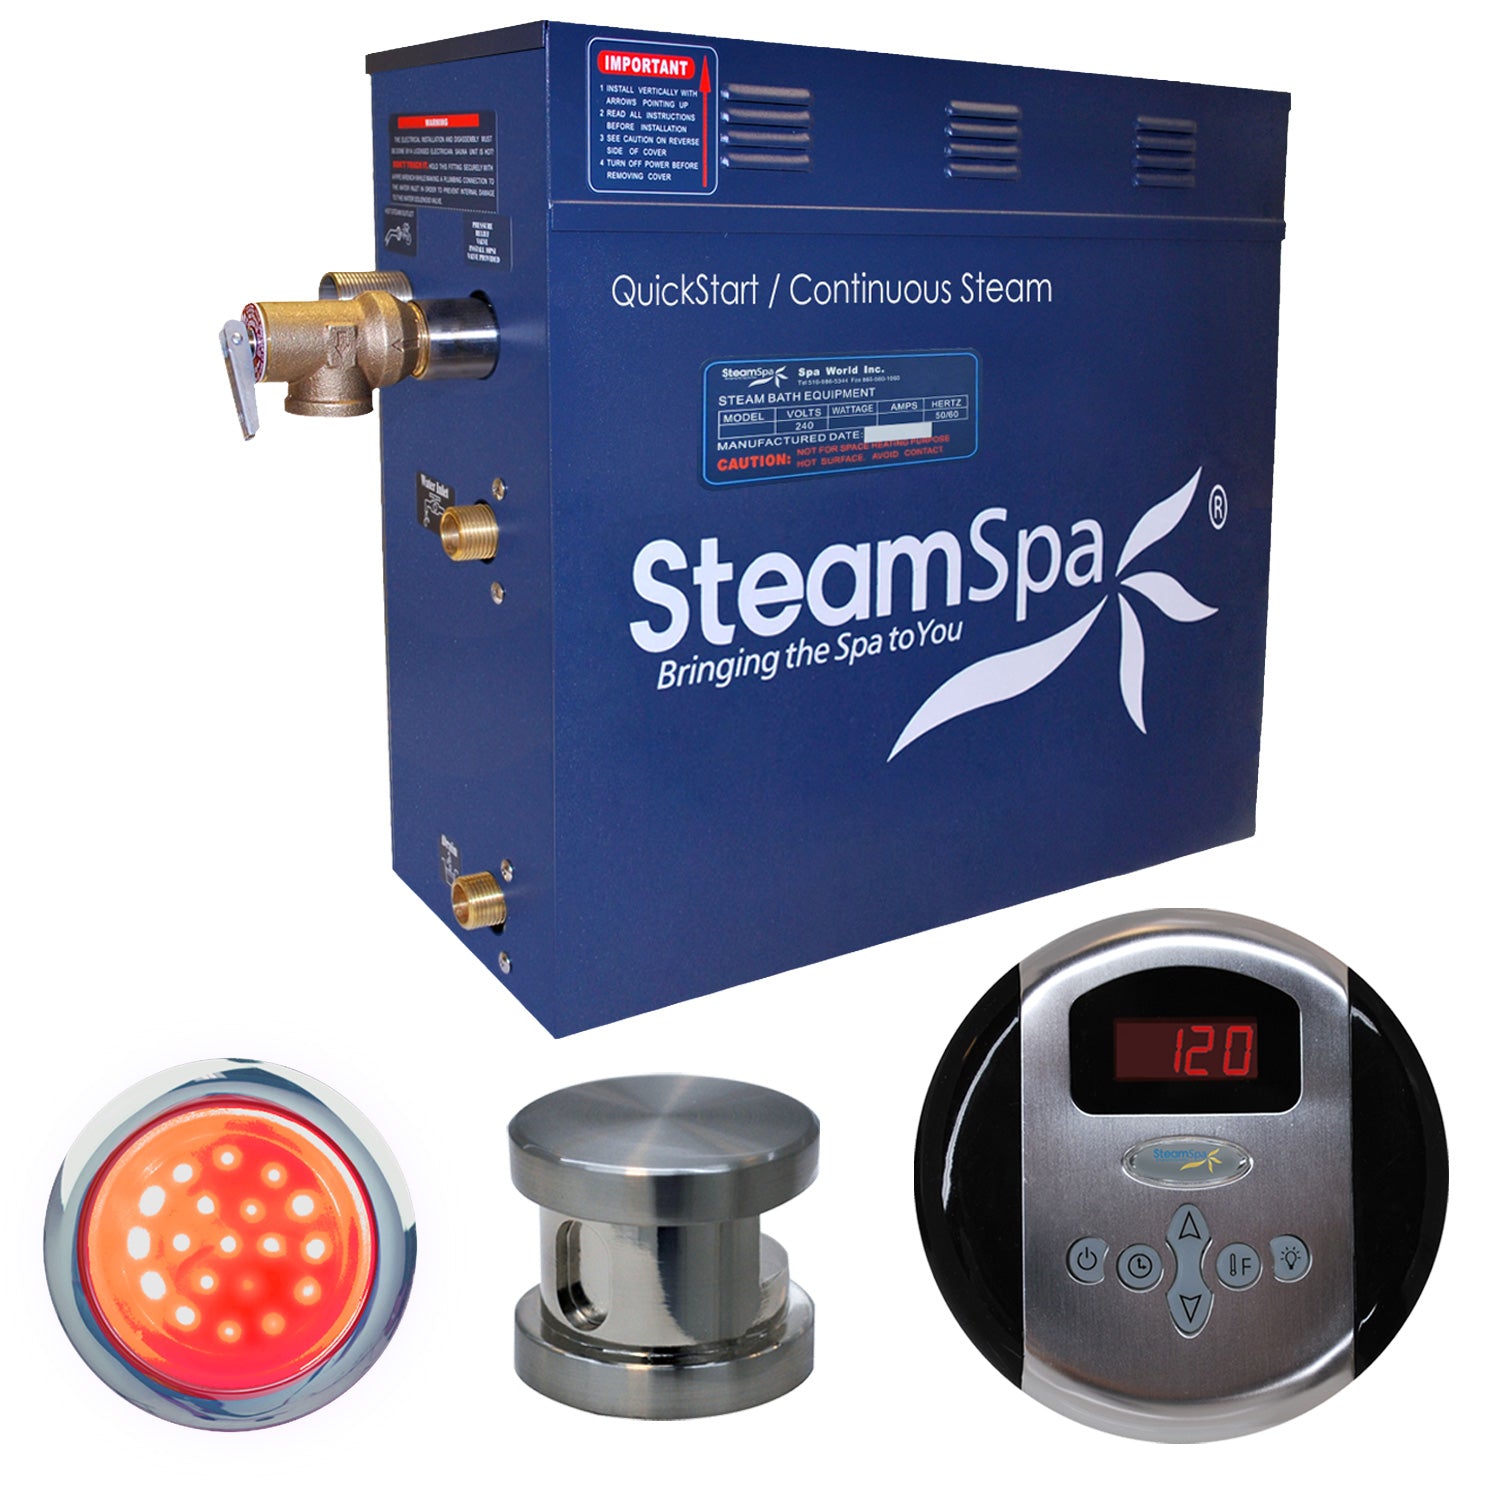 SteamSpa Indulgence 4.5 KW QuickStart Acu-Steam Bath Generator Package - Stainless steel - 12 in. L x 6 in. W x 2 in. H - Brushed Nickel - Includes a 4.5kW QuickStart Acu-Steam Bath Generator, Control Panel, Brushed Nickel Steam head, Chroma therapy Light - IN450 - Vital Hydrotherapy